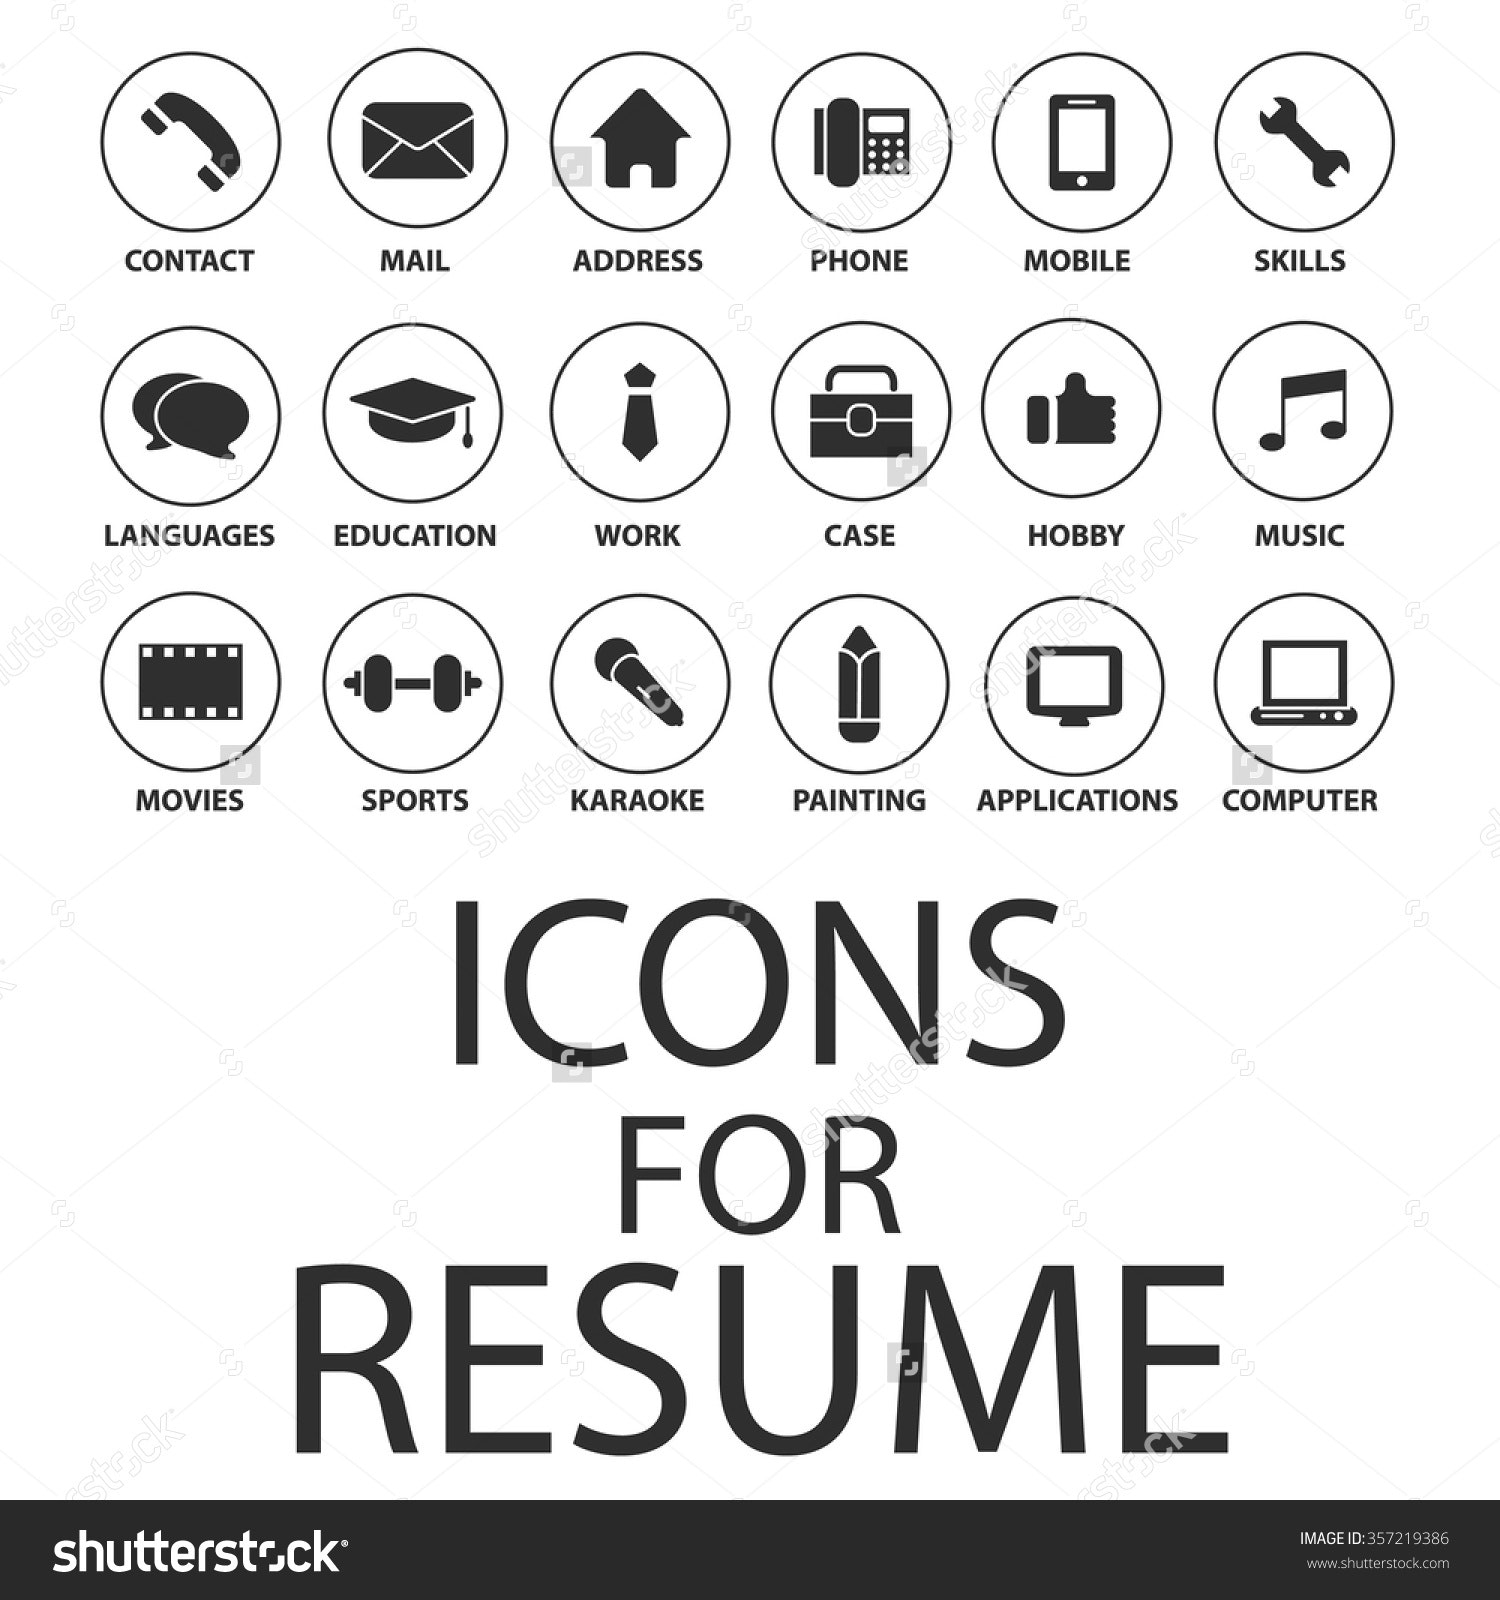 contact-icon-for-resume-at-vectorified-collection-of-contact-icon